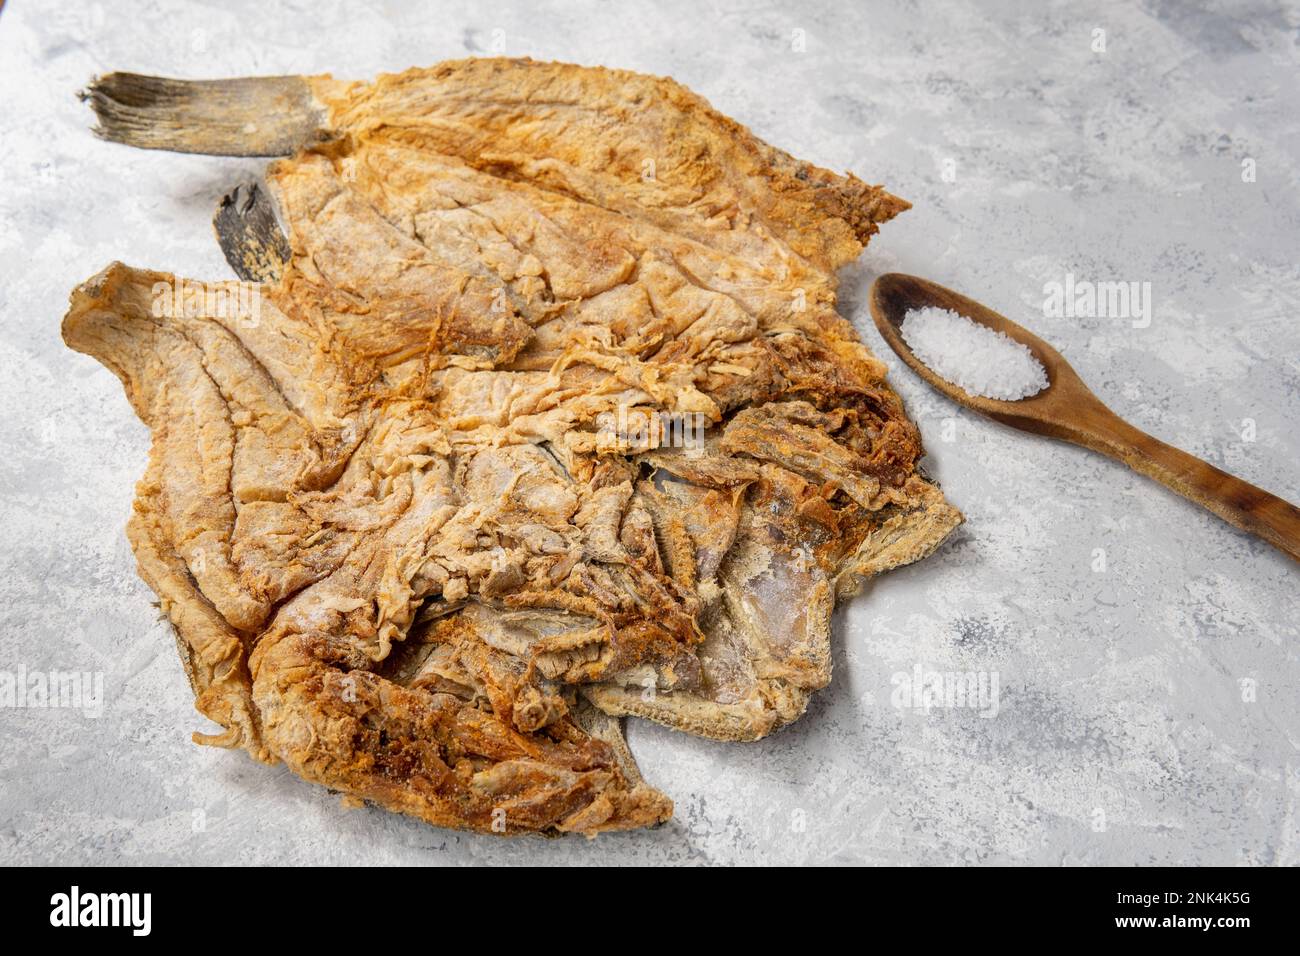 Cod preserved in salting on a light textured surface Stock Photo